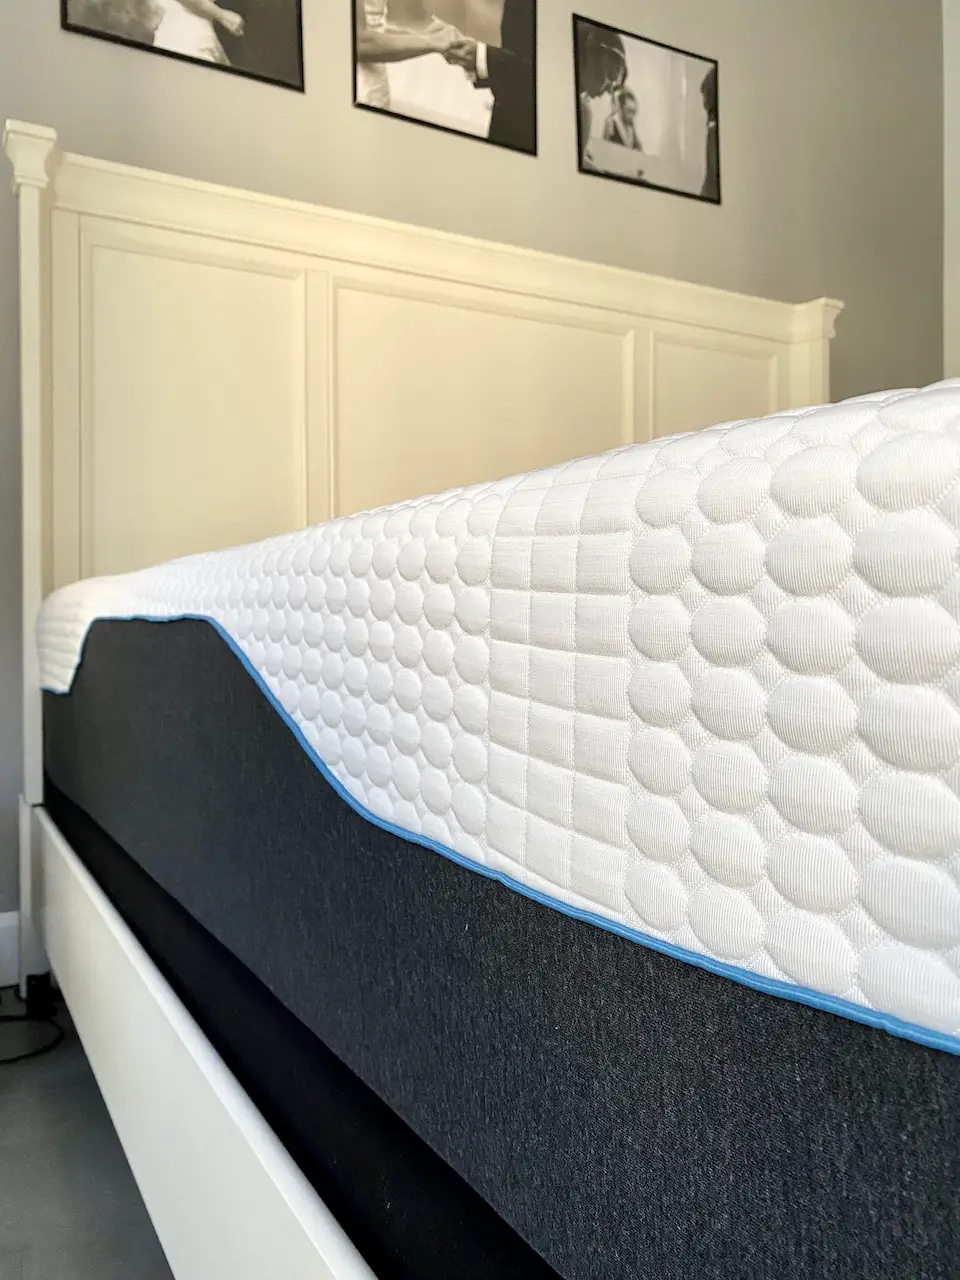 Review of Hybrid mattress for hot sleepers